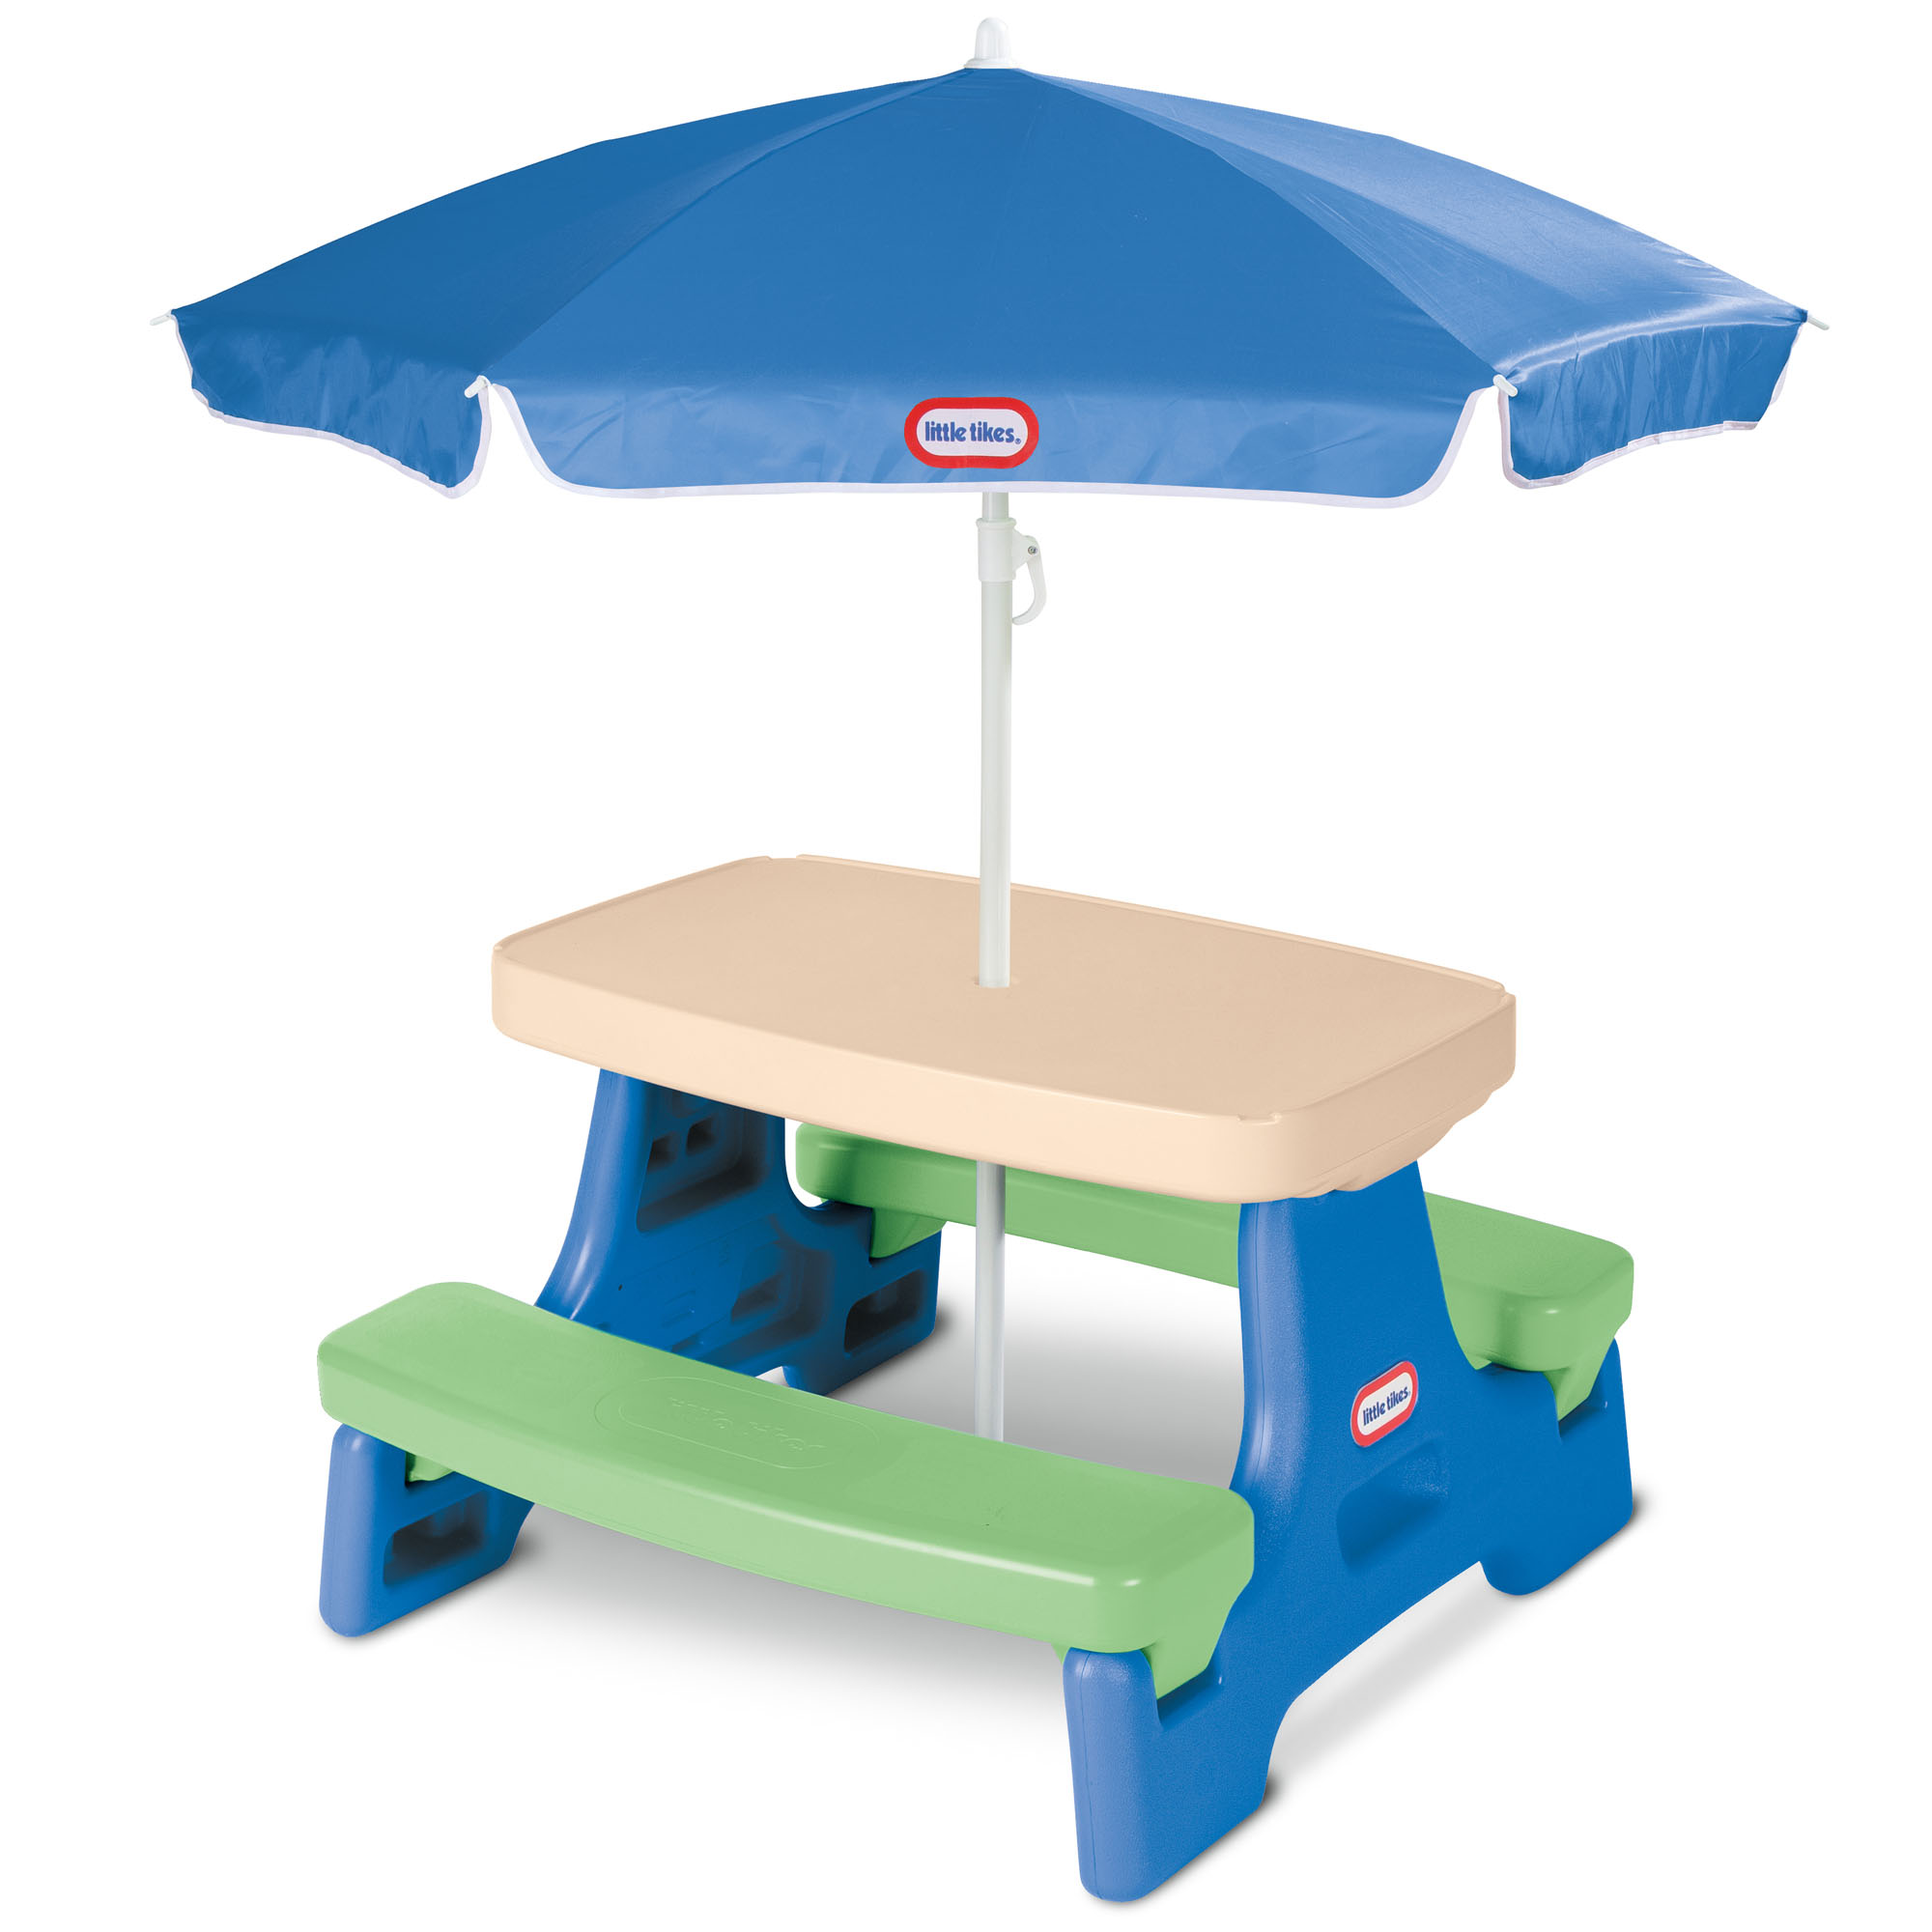 Little Tikes Easy Store Jr. Picnic Table with Umbrella, Blue & Green - Play Table with Umbrella, for Kids - image 3 of 7